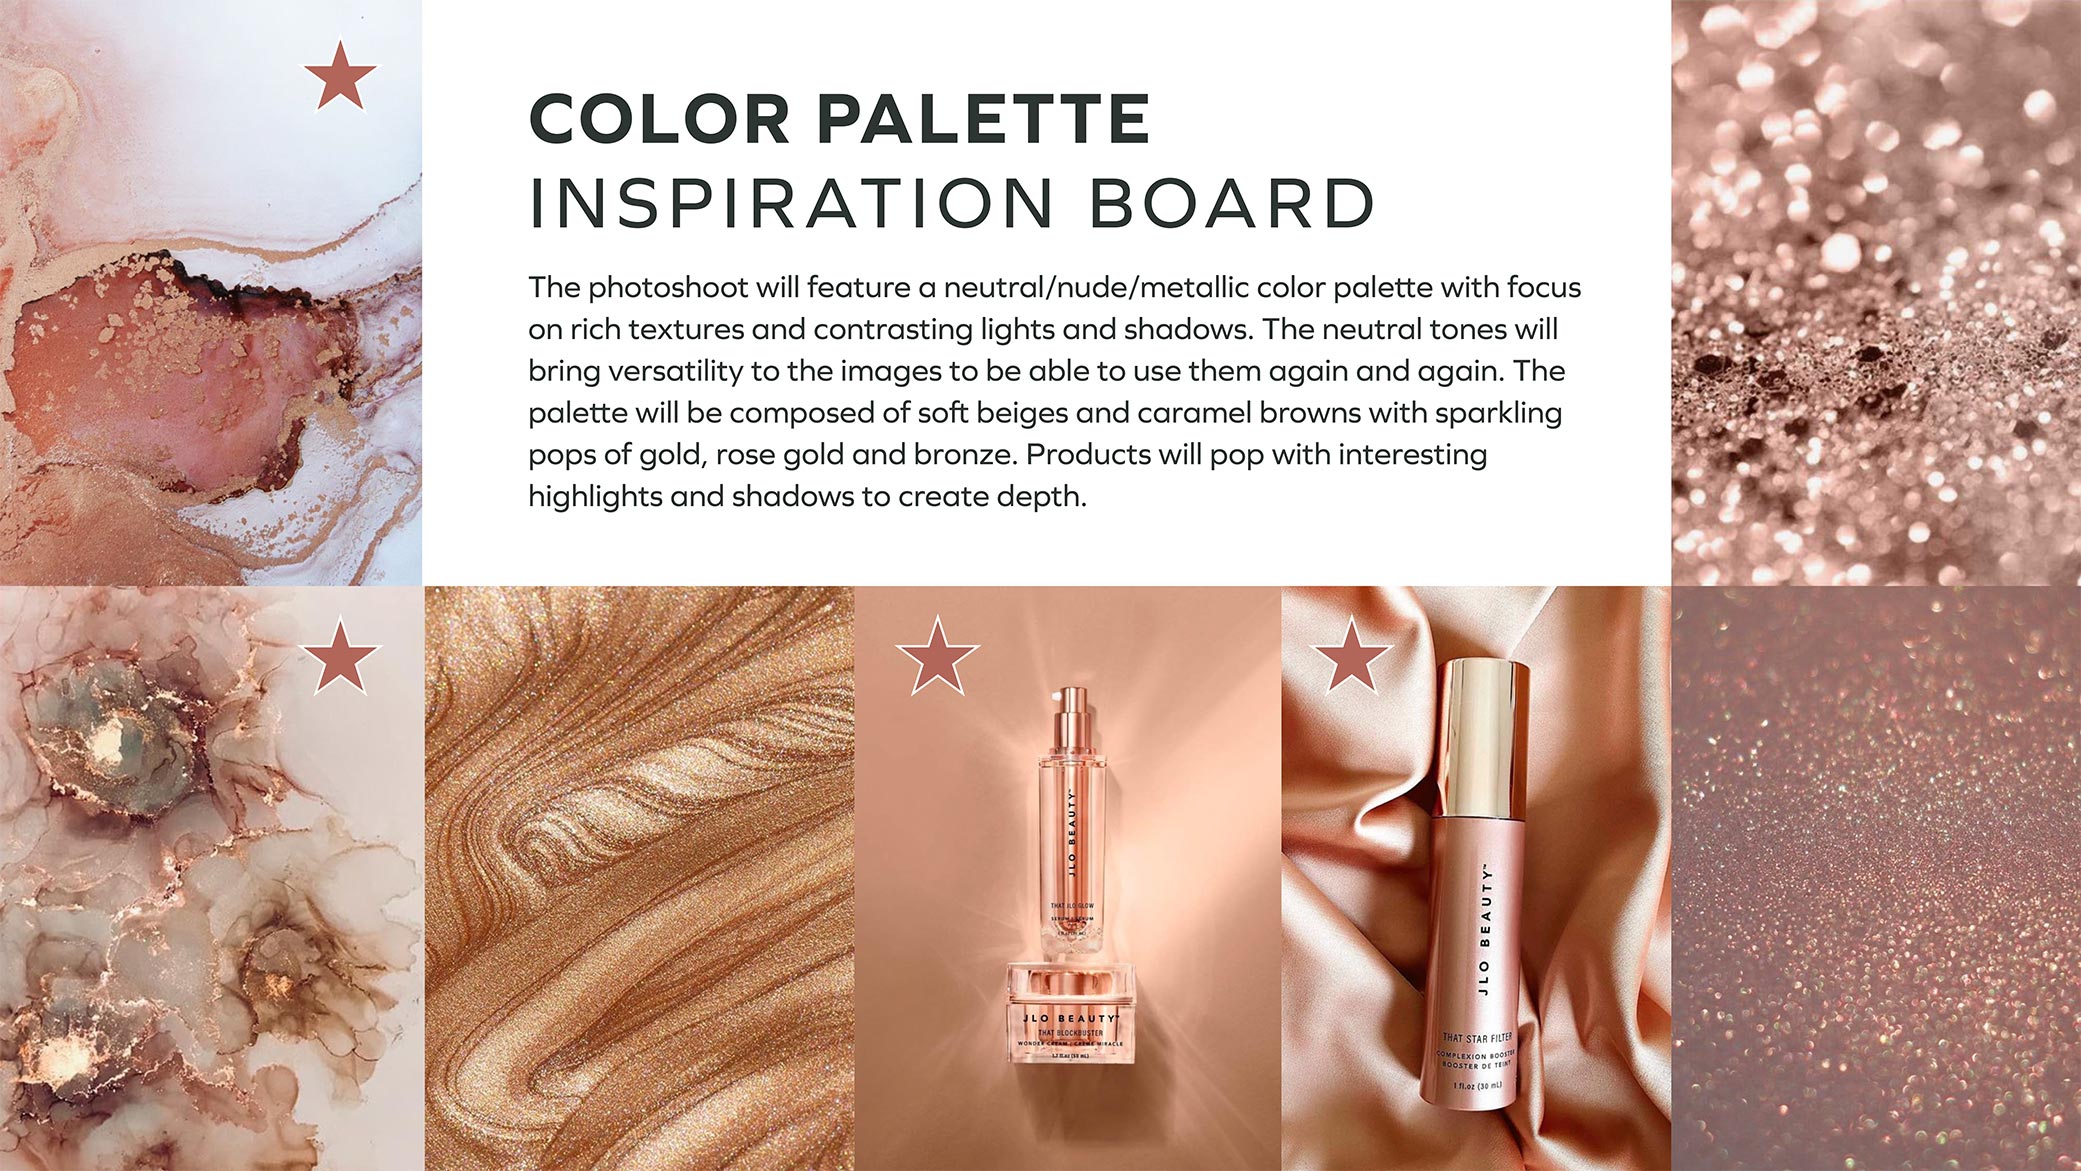 CTRL Cosmetics color palette inspiration board showcasing tones, textures and images.